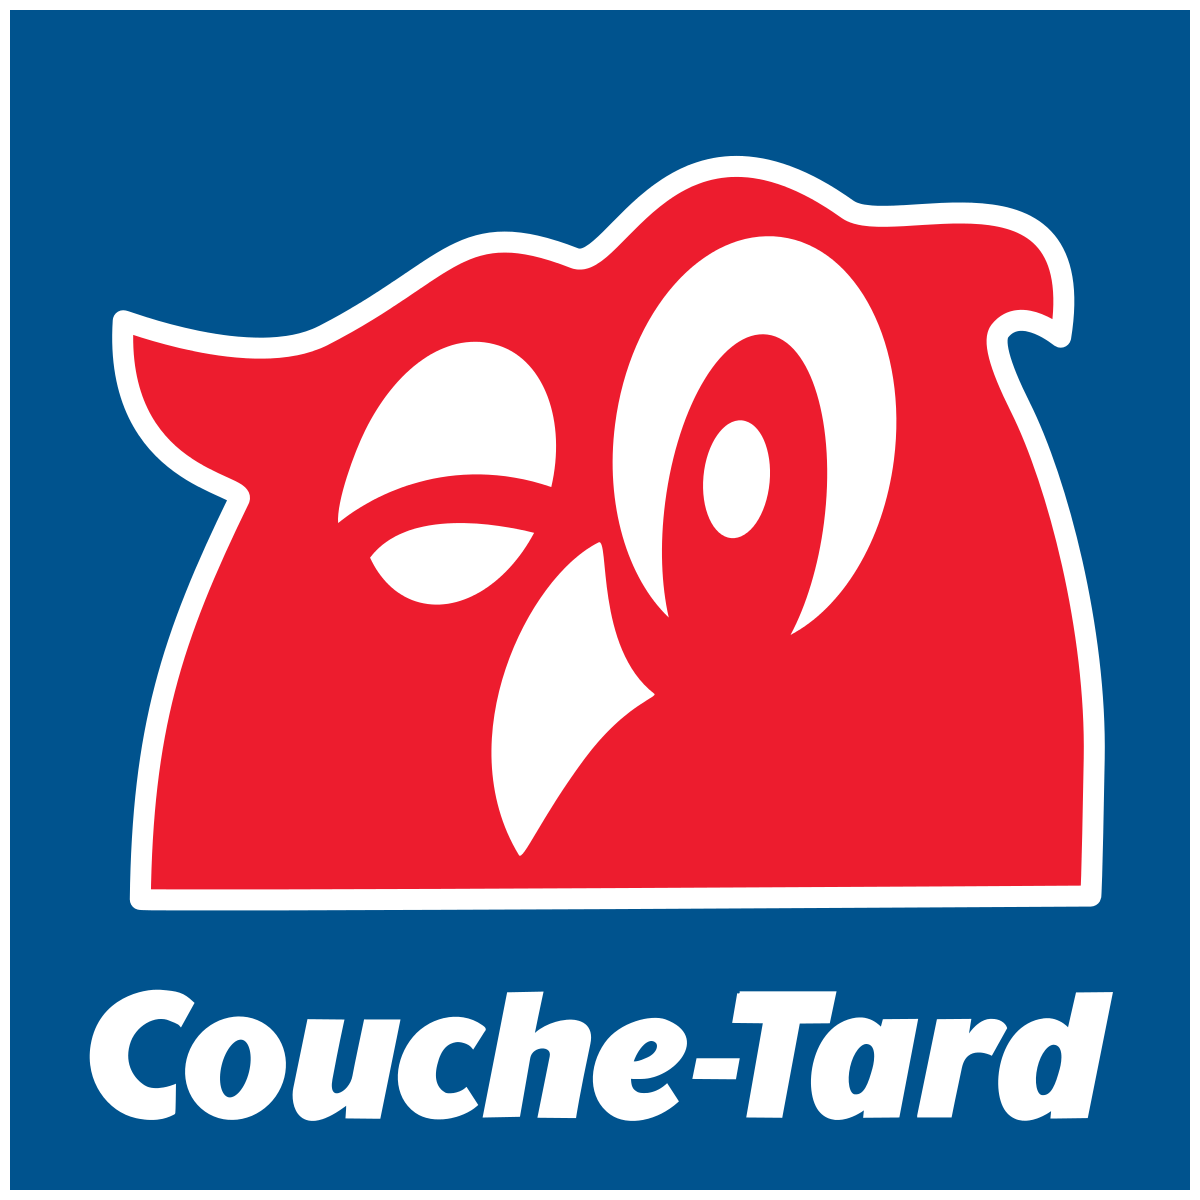 Red Bird with a French Company Logo - Alimentation Couche-Tard